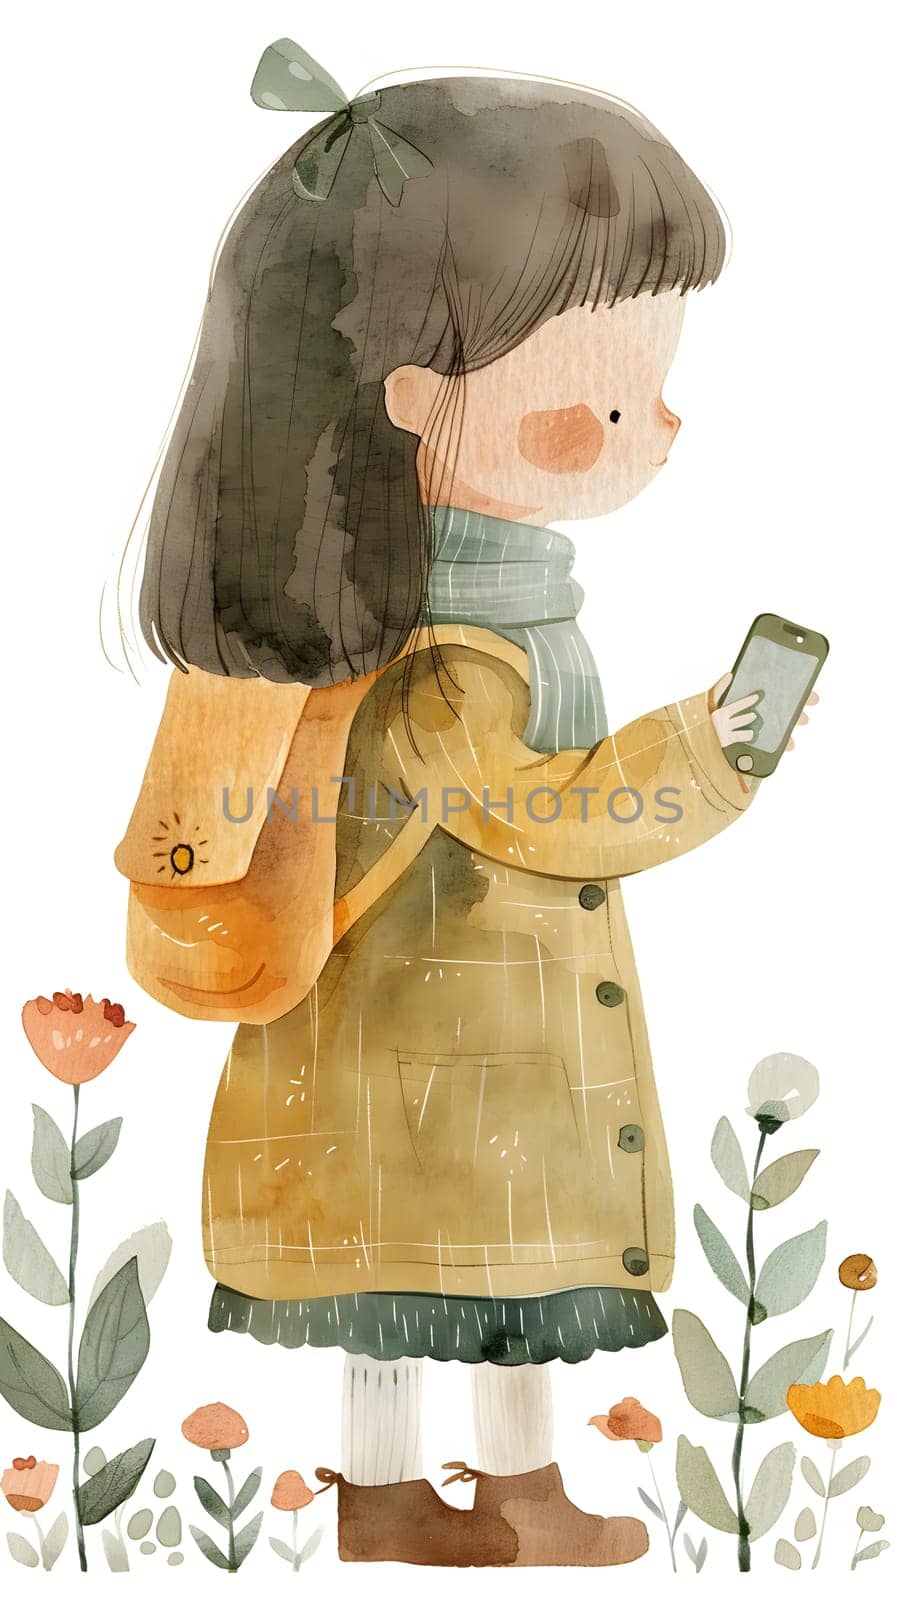 A little girl with a backpack is checking her cell phone by Nadtochiy